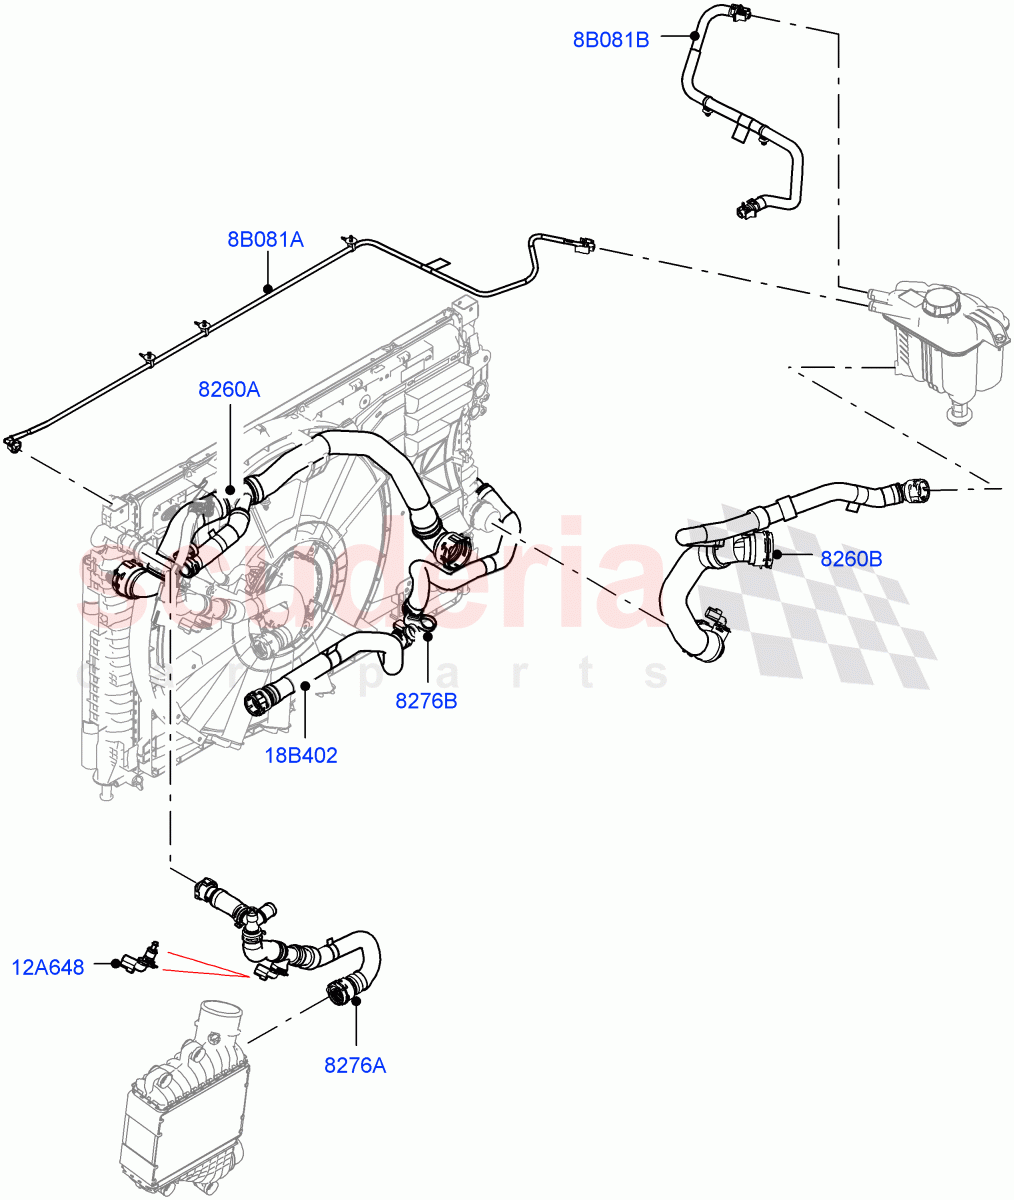 Cooling System Pipes And Hoses(2.0L AJ21D4 Diesel Mid,6 Speed Manual Trans BG6,Itatiaia (Brazil)) of Land Rover Land Rover Range Rover Evoque (2019+) [2.0 Turbo Diesel AJ21D4]